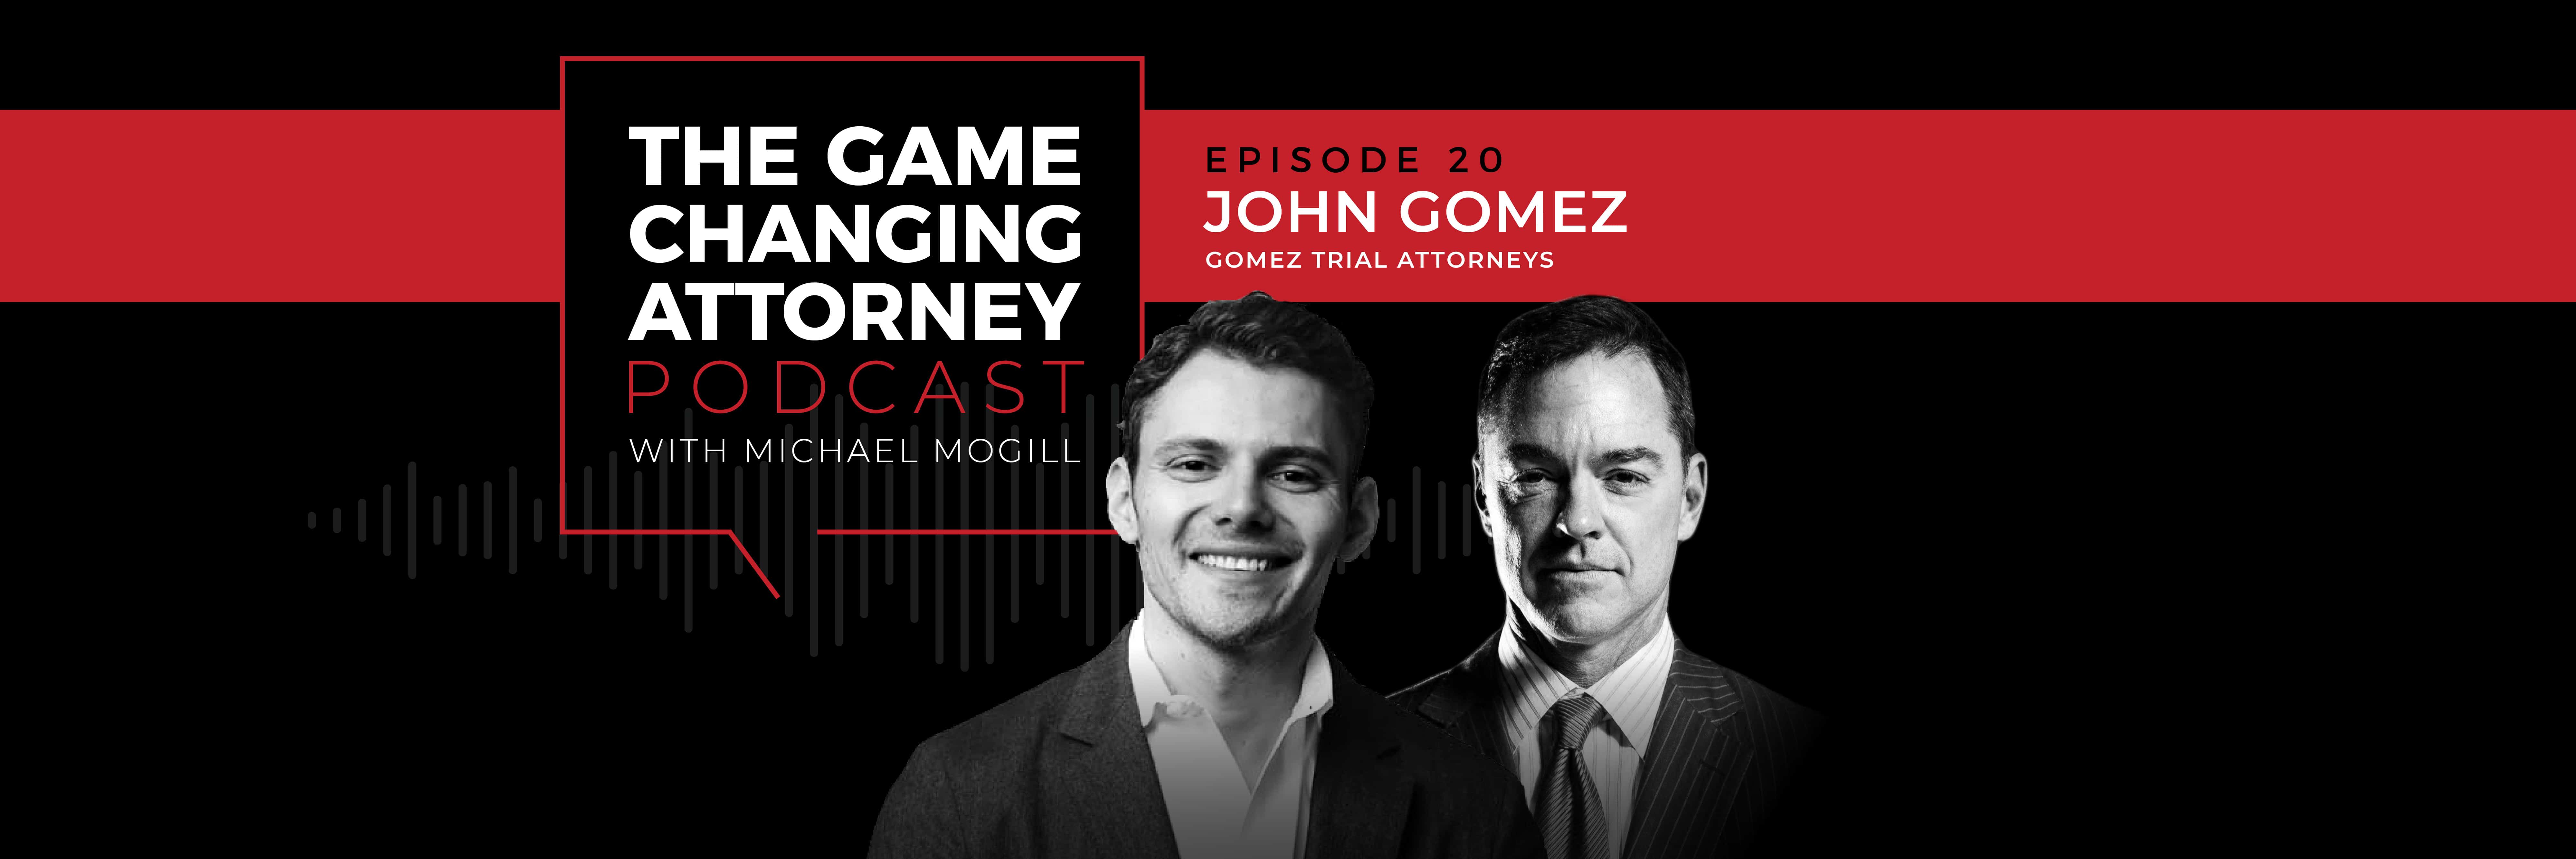 John Gomez - The Game Changing Attorney Podcast - Desktop